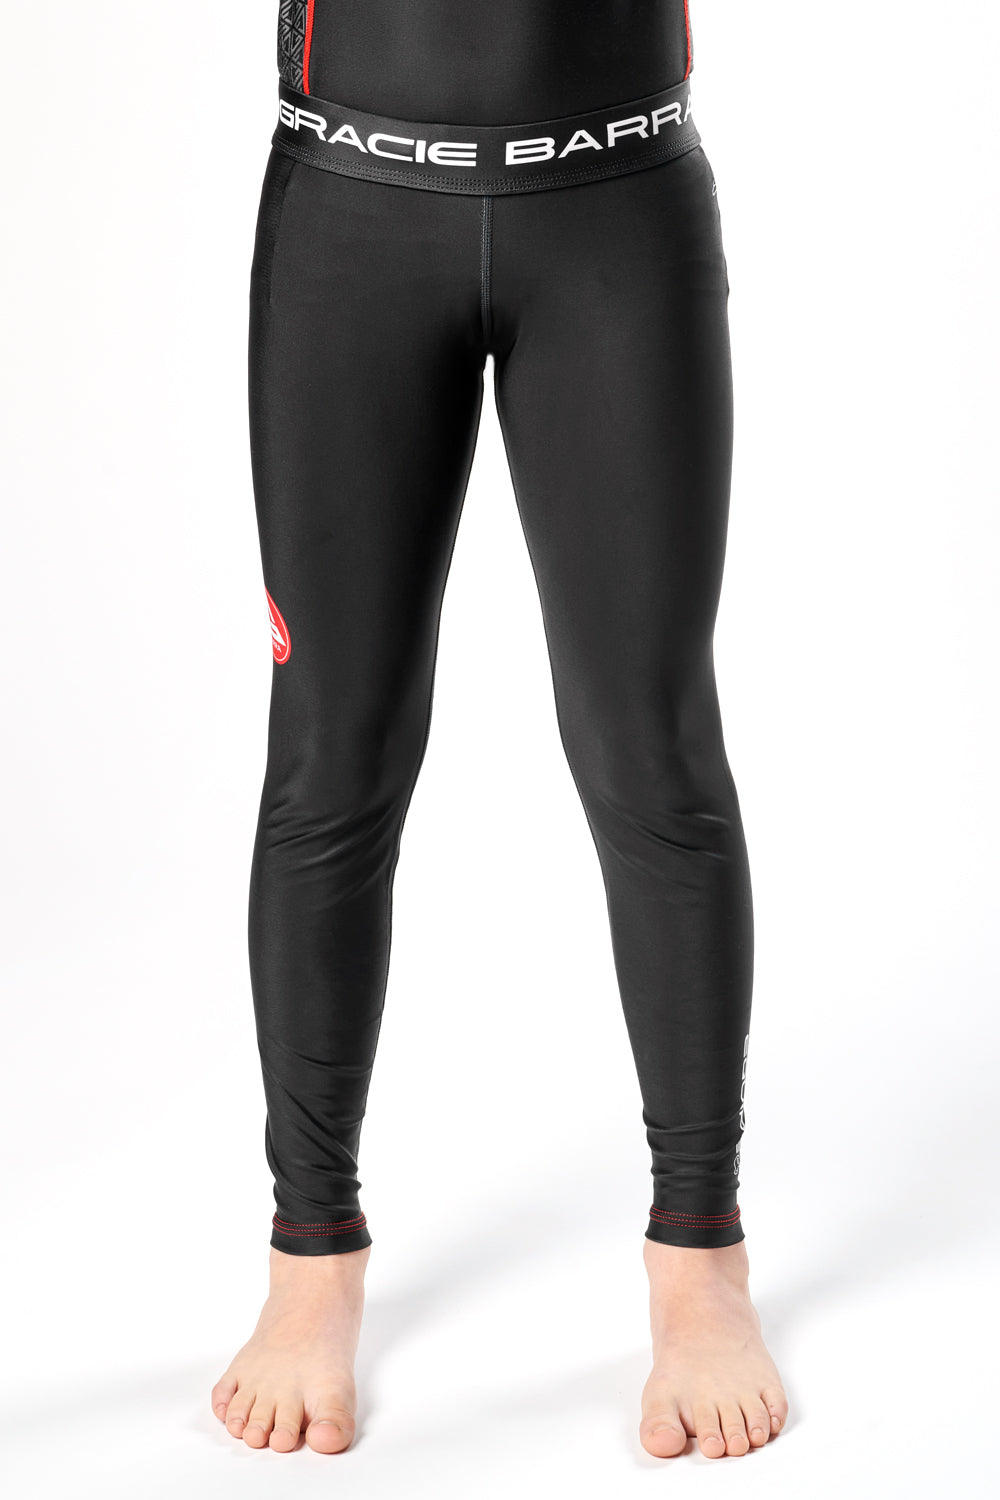 Youth Compression Pants - Black – GB Wear Europe